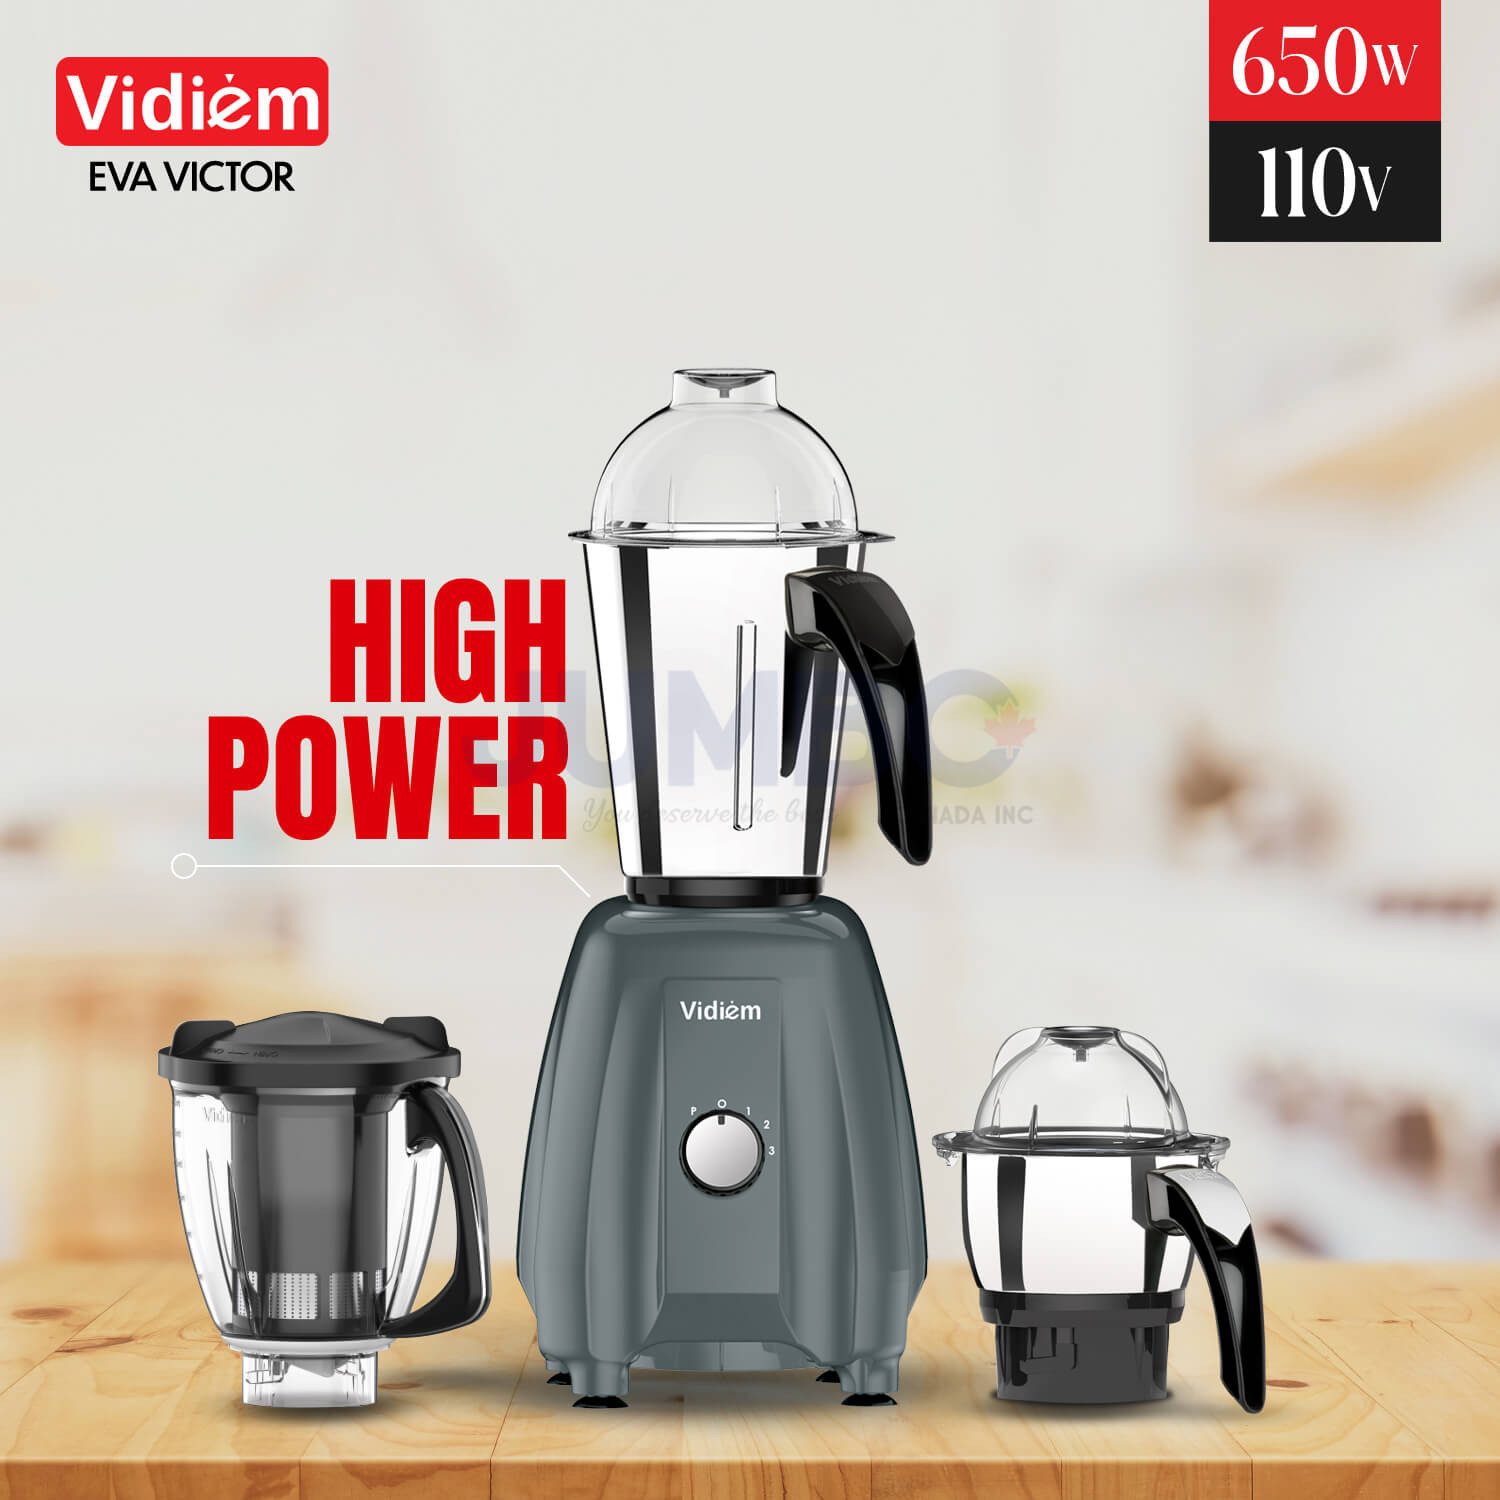 vidiem-eva-victor-650w-110v-stainless-steel-jars-indian-mixer-grinder-spice-coffee-grinder-with-almond-nut-milk-juice-extractor-for-use-in-canada-usa6